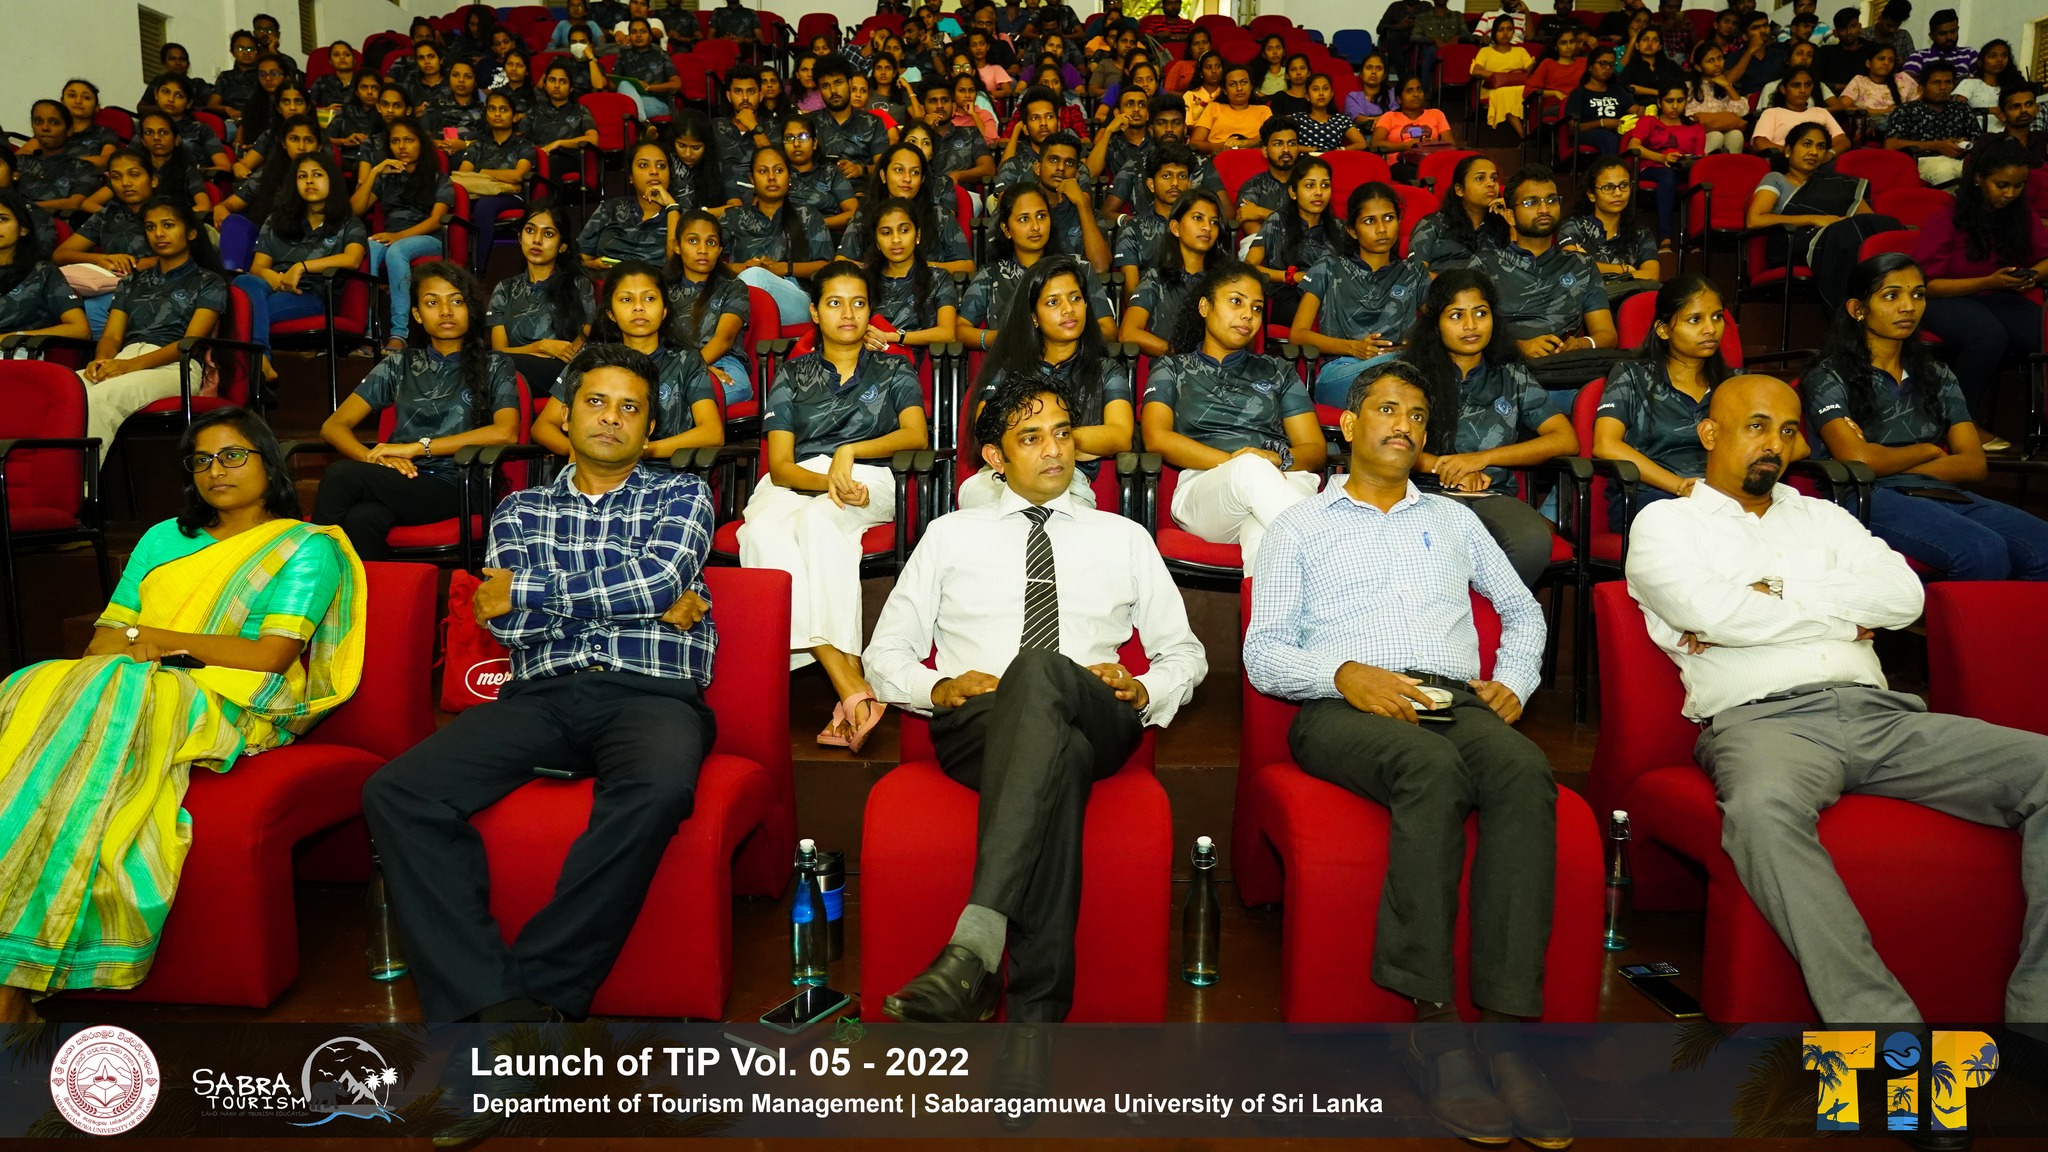 The launch of the TiP Vol. 05 - 2022